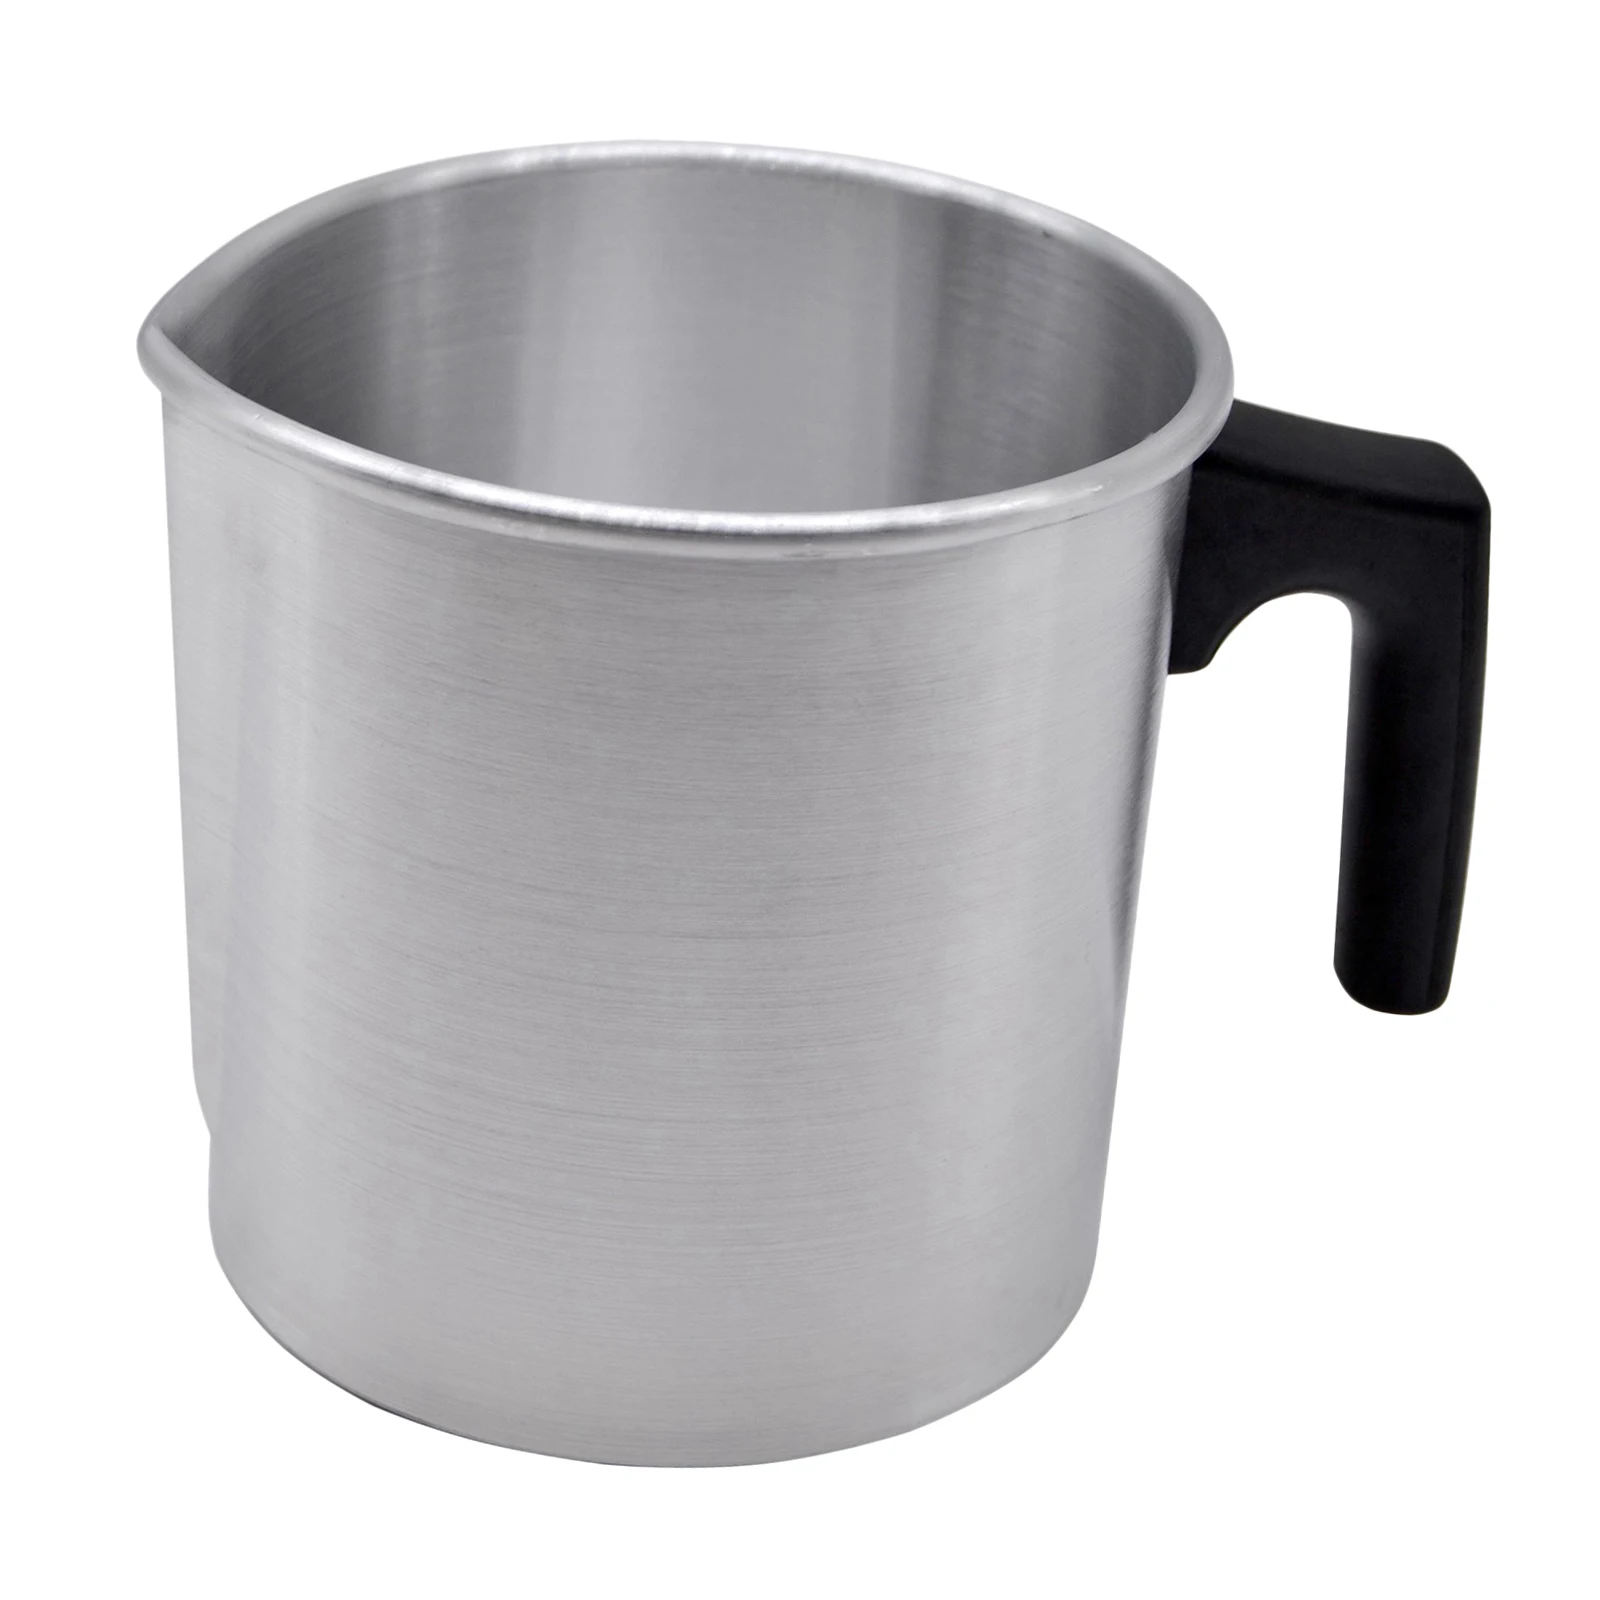 Large Watering Can Candle Making Wax Melting Cup Coffee Pot Kitchen DIY 1.2L